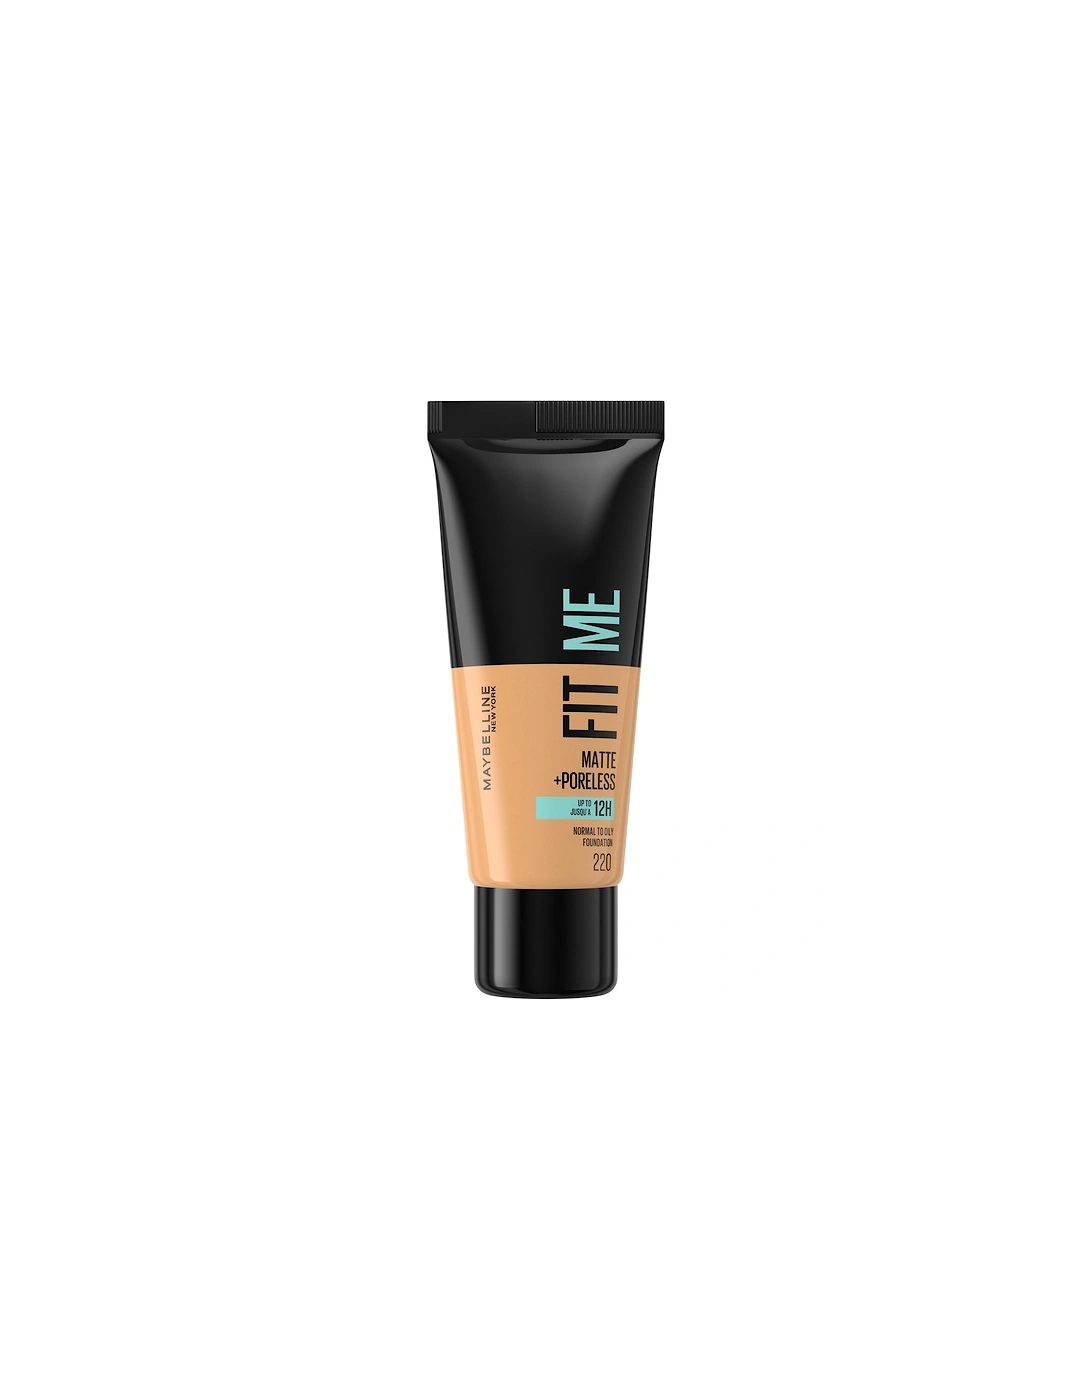 Fit Me! Matte and Poreless Foundation - 220 Natural Beige - - Fit Me! Matte and Poreless Foundation 30ml (Various Shades) - Foundation - Fit Me! Matte and Poreless Foundation 30ml (Various Shades) - Tina - Fit Me! Matte and Poreless Foundation 30ml (Various Shades) - Jo, 2 of 1